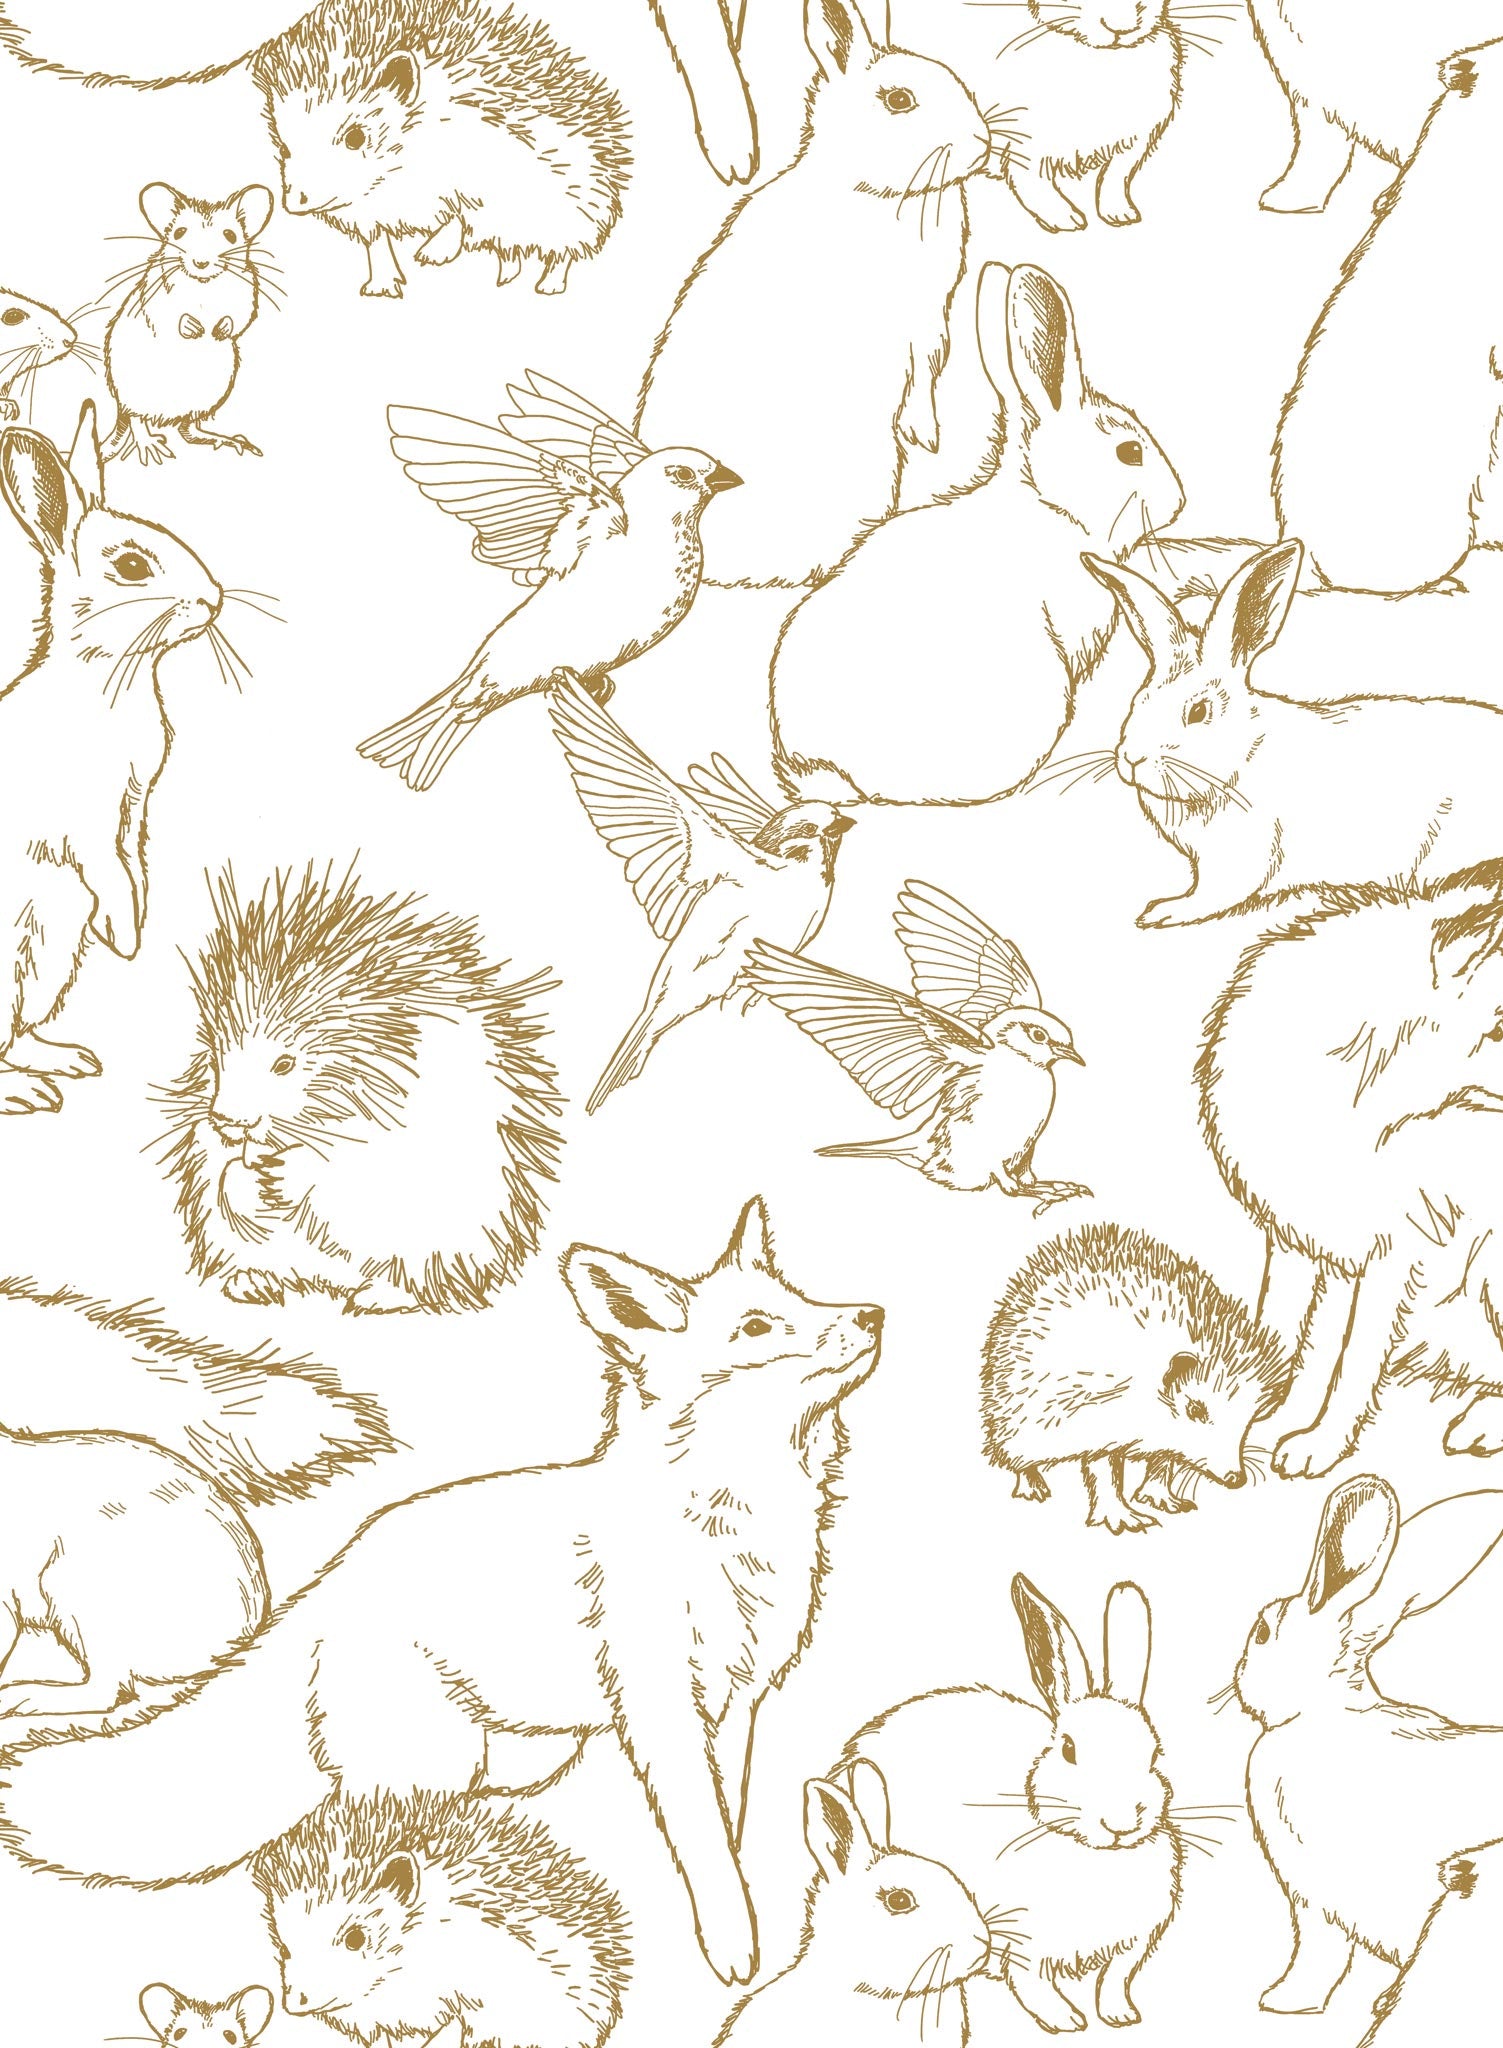 Hundred Acre Wood ia a Minimalist wallpaper by Opposite Wall of a small animals of the forest